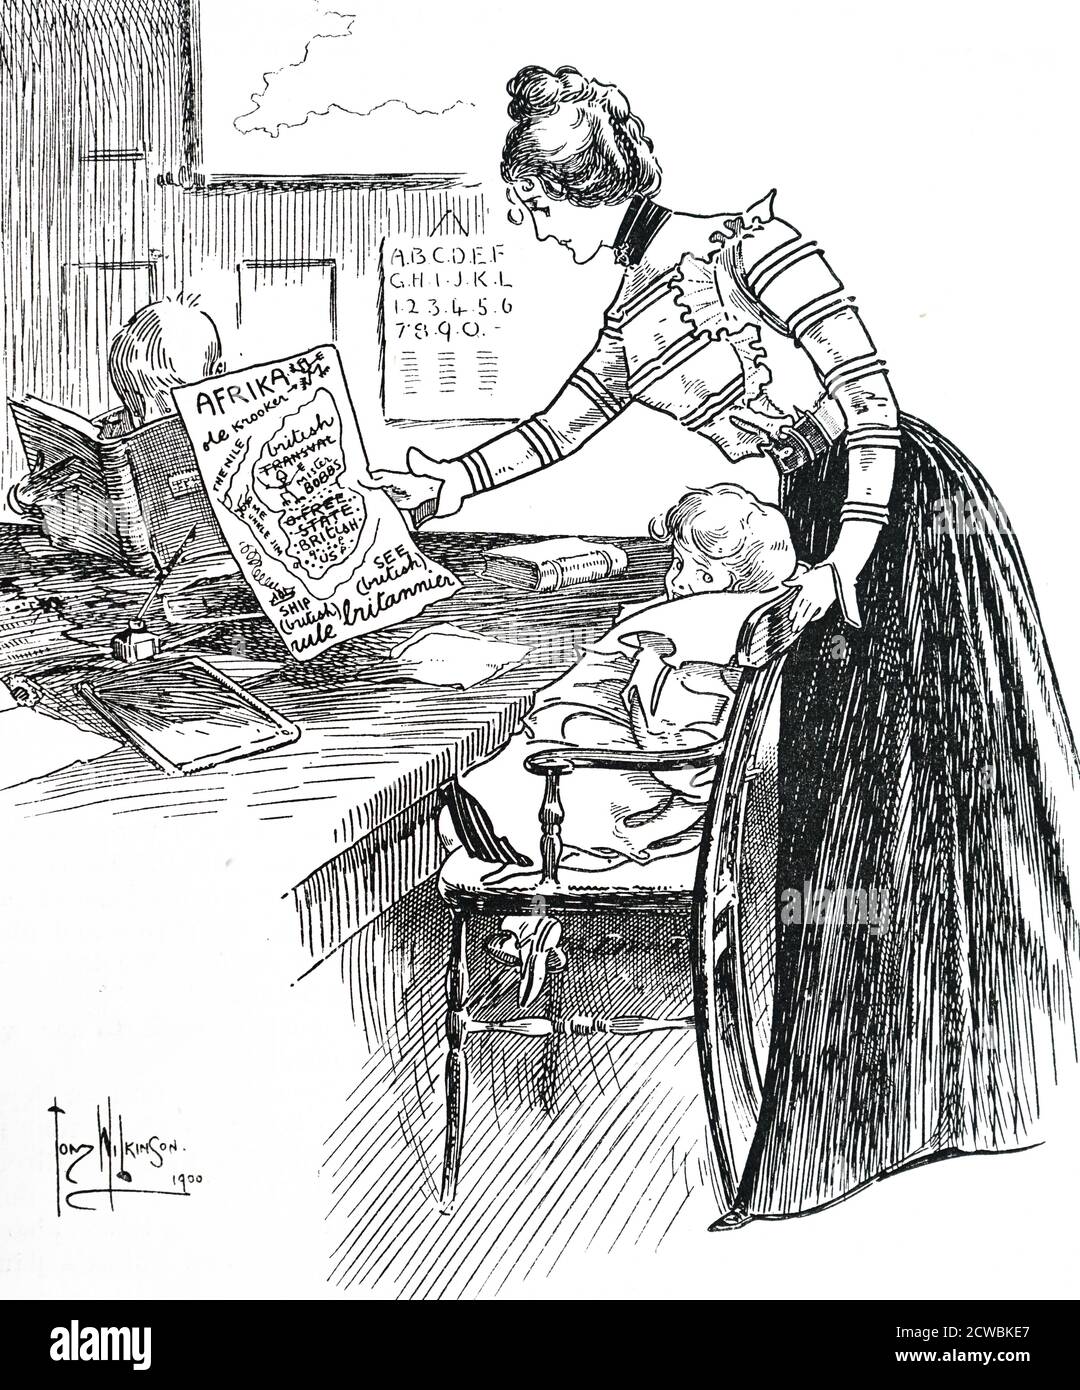 Cartoon depicting a governess with her charges. She is attempting to teach them geography. Stock Photo